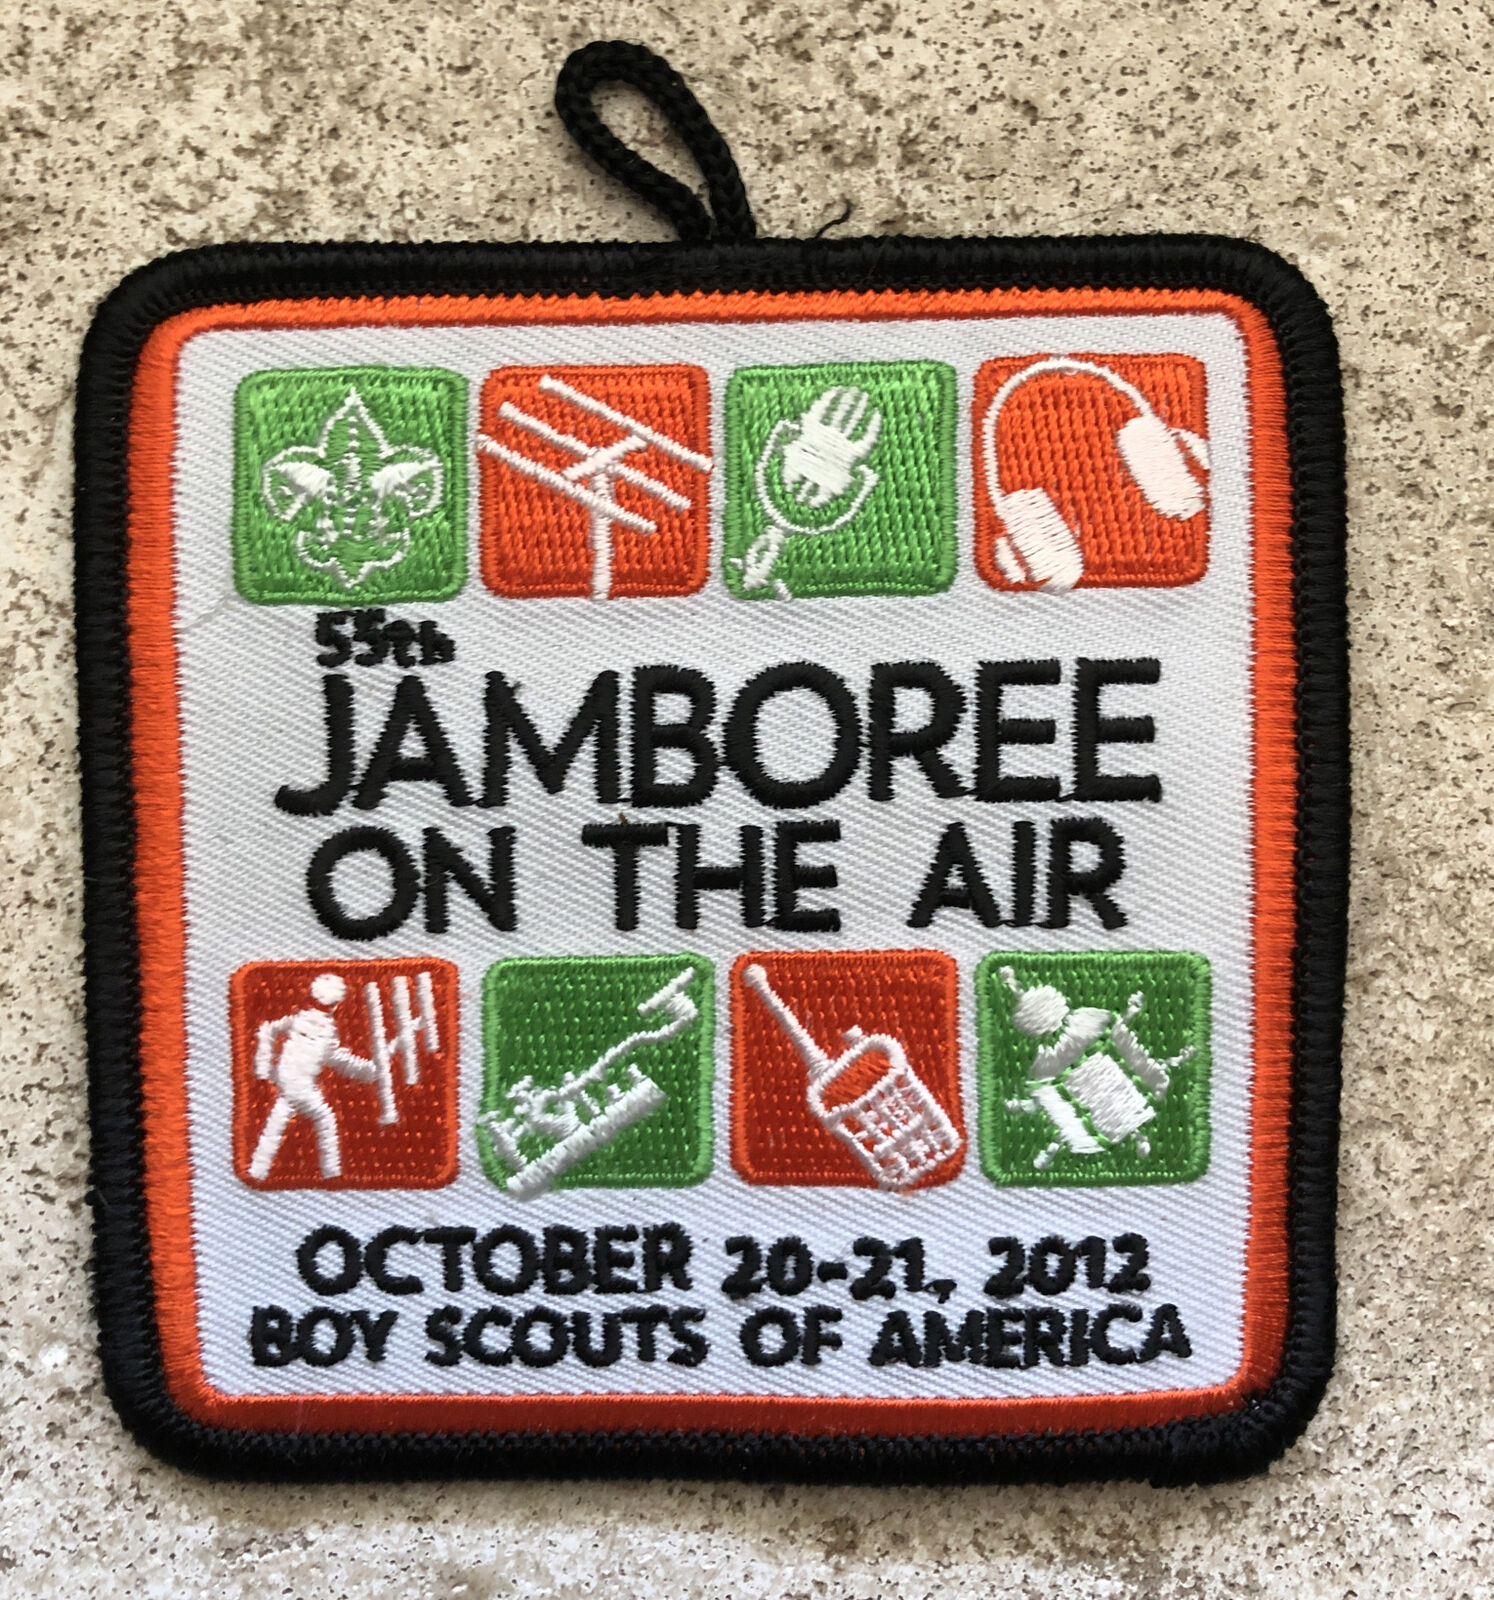 Boy Scouts of America Patch 53rd Jamboree On The Air 2012 BSA